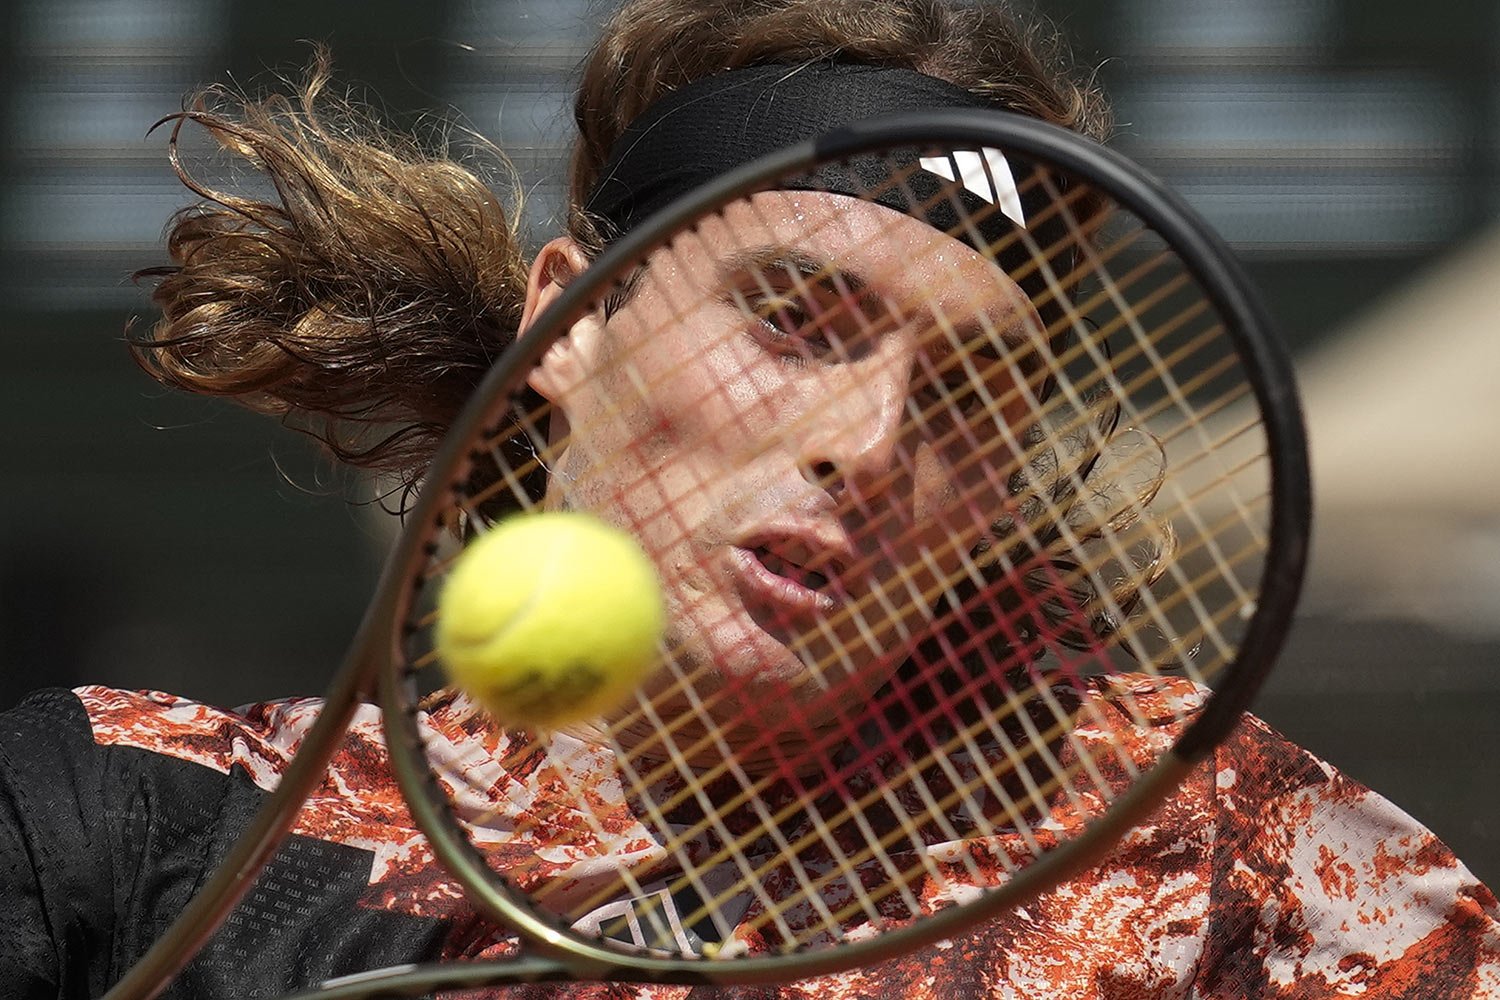  Greece's Stefanos Tsitsipas plays a shot against Jiri Vesely of the Czech Republic during their first round match of the French Open tennis tournament at the Roland Garros stadium in Paris, May 28, 2023. (AP Photo/Christophe Ena) 